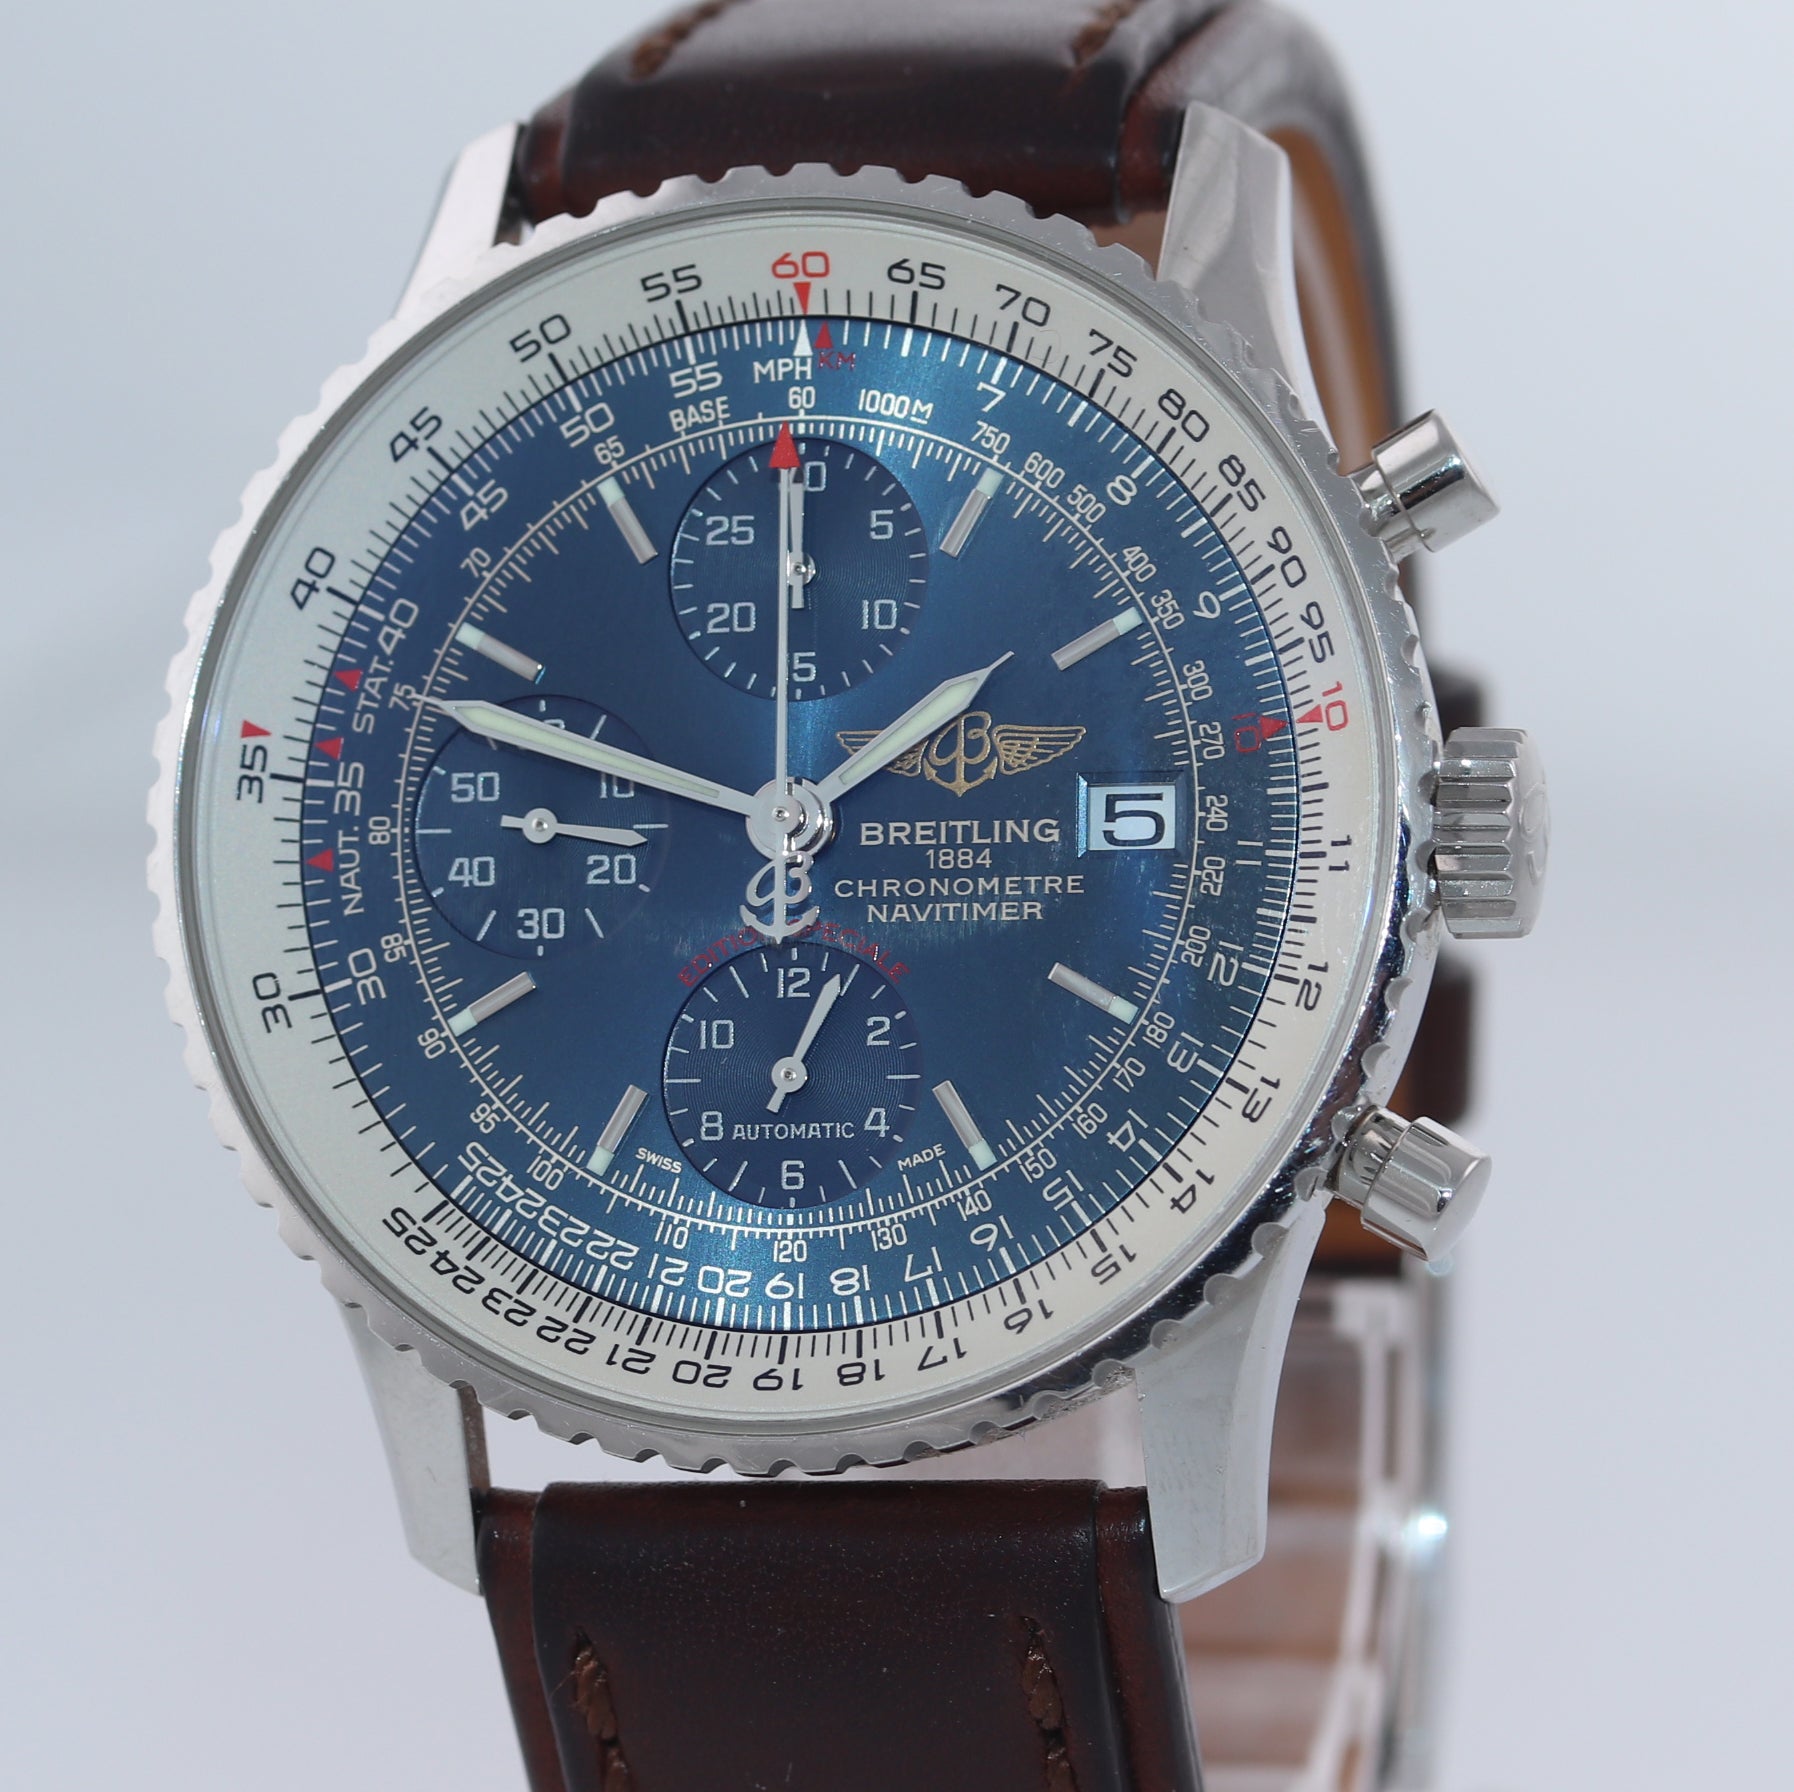 PAPERS Breitling Navitimer Chronograph 42mm Blue Dial Leather A13324 Watch